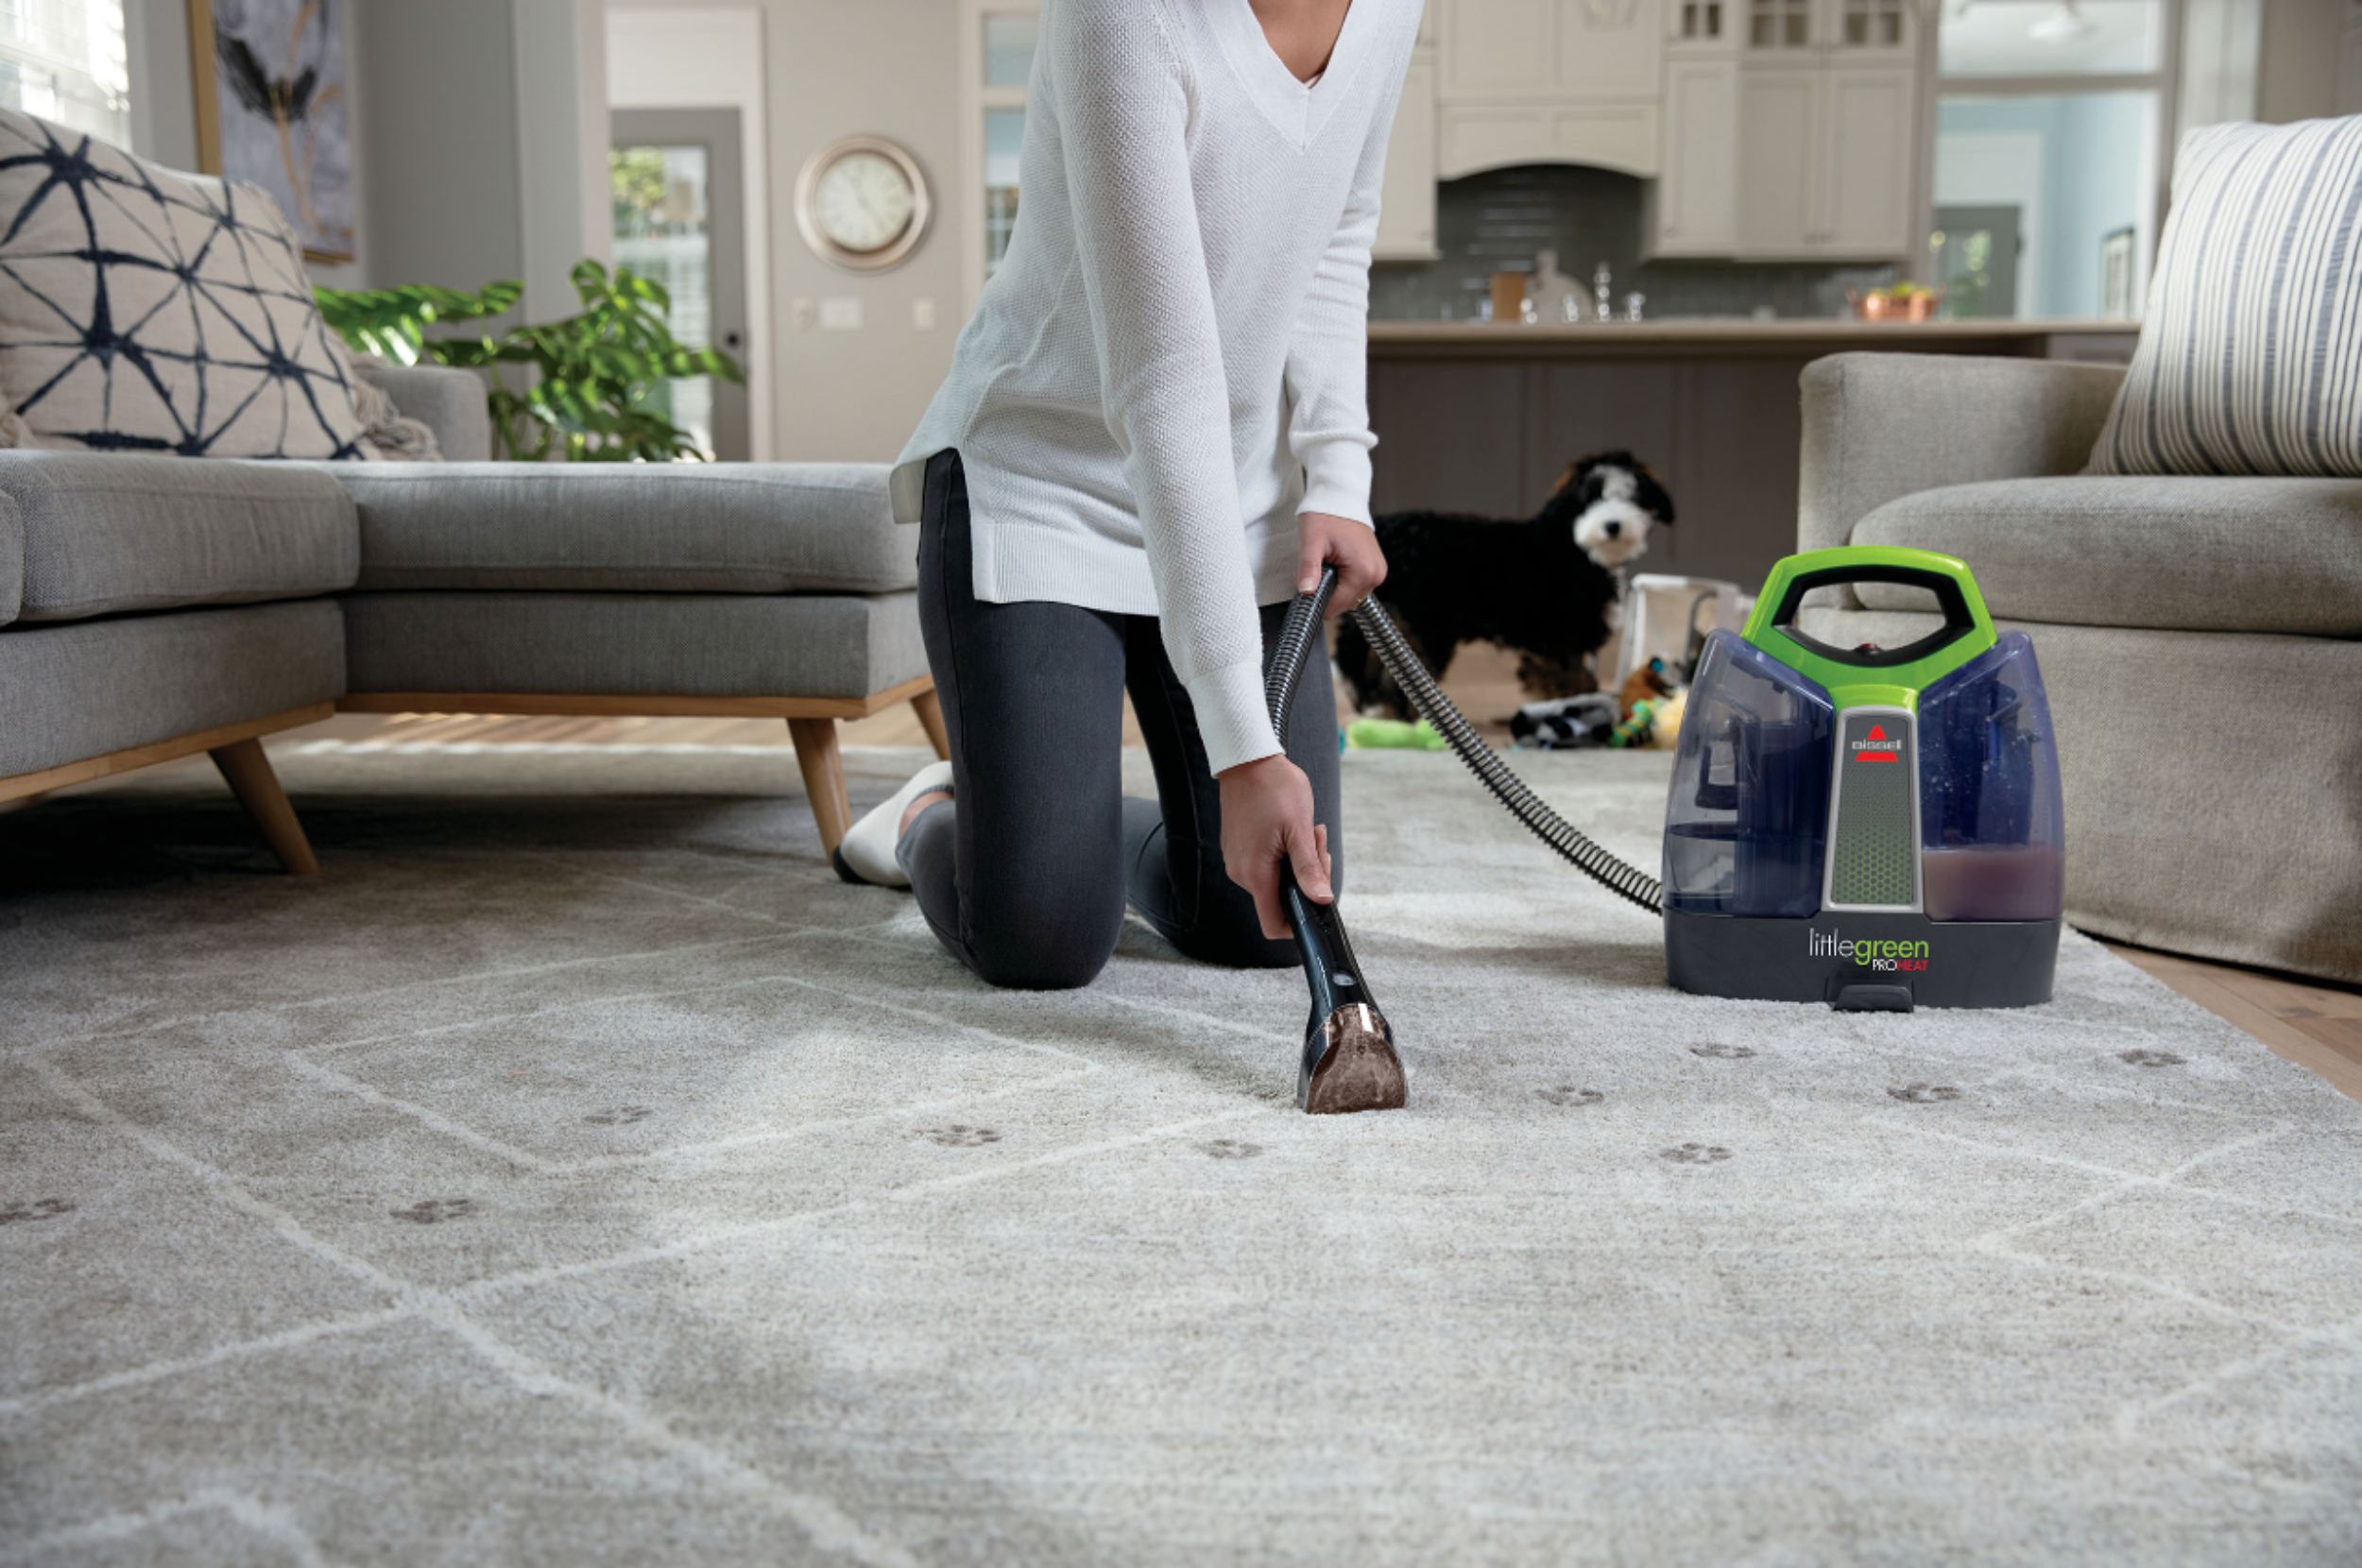 Bissell's Little Green Carpet Cleaner is 37% off today